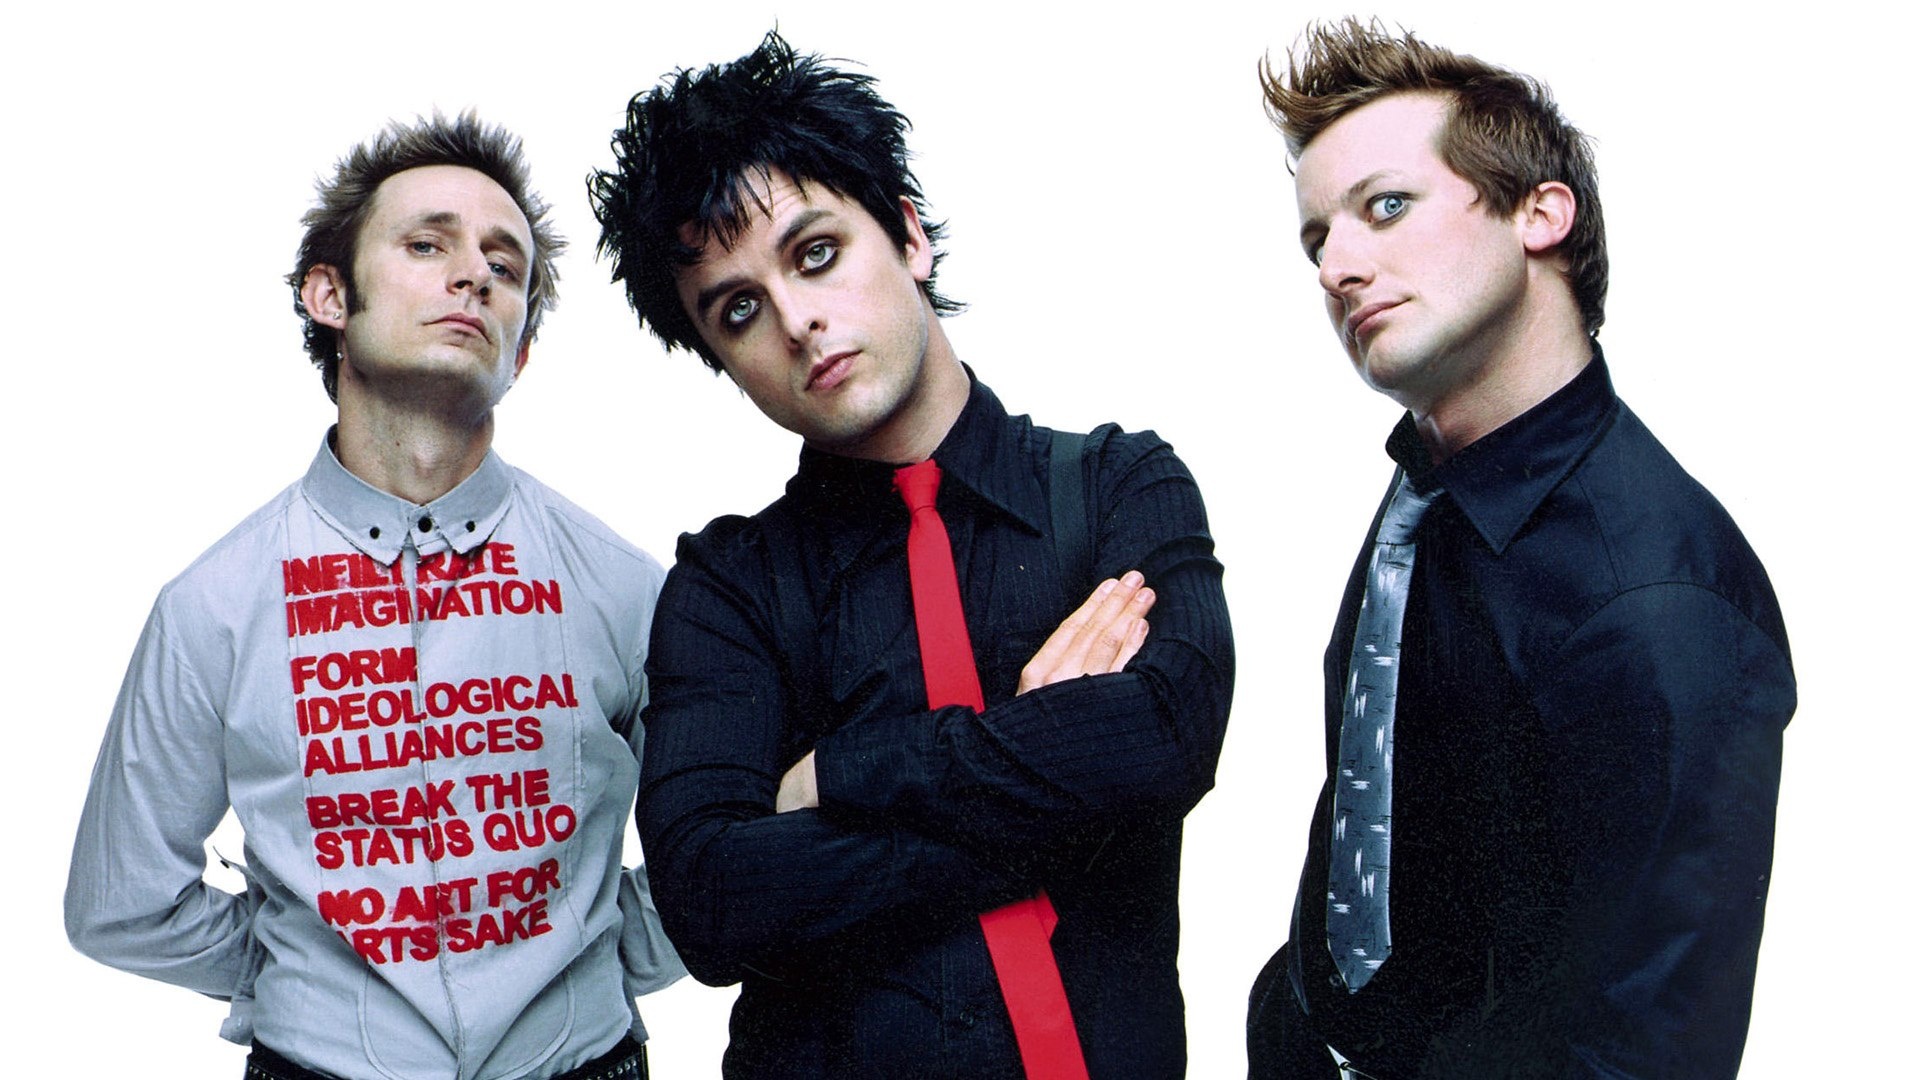 Green Day (Band): Billie Joe Armstrong, Mike Dirnt, Tre Cool - the power trio and the leading members of the group. 1920x1080 Full HD Wallpaper.